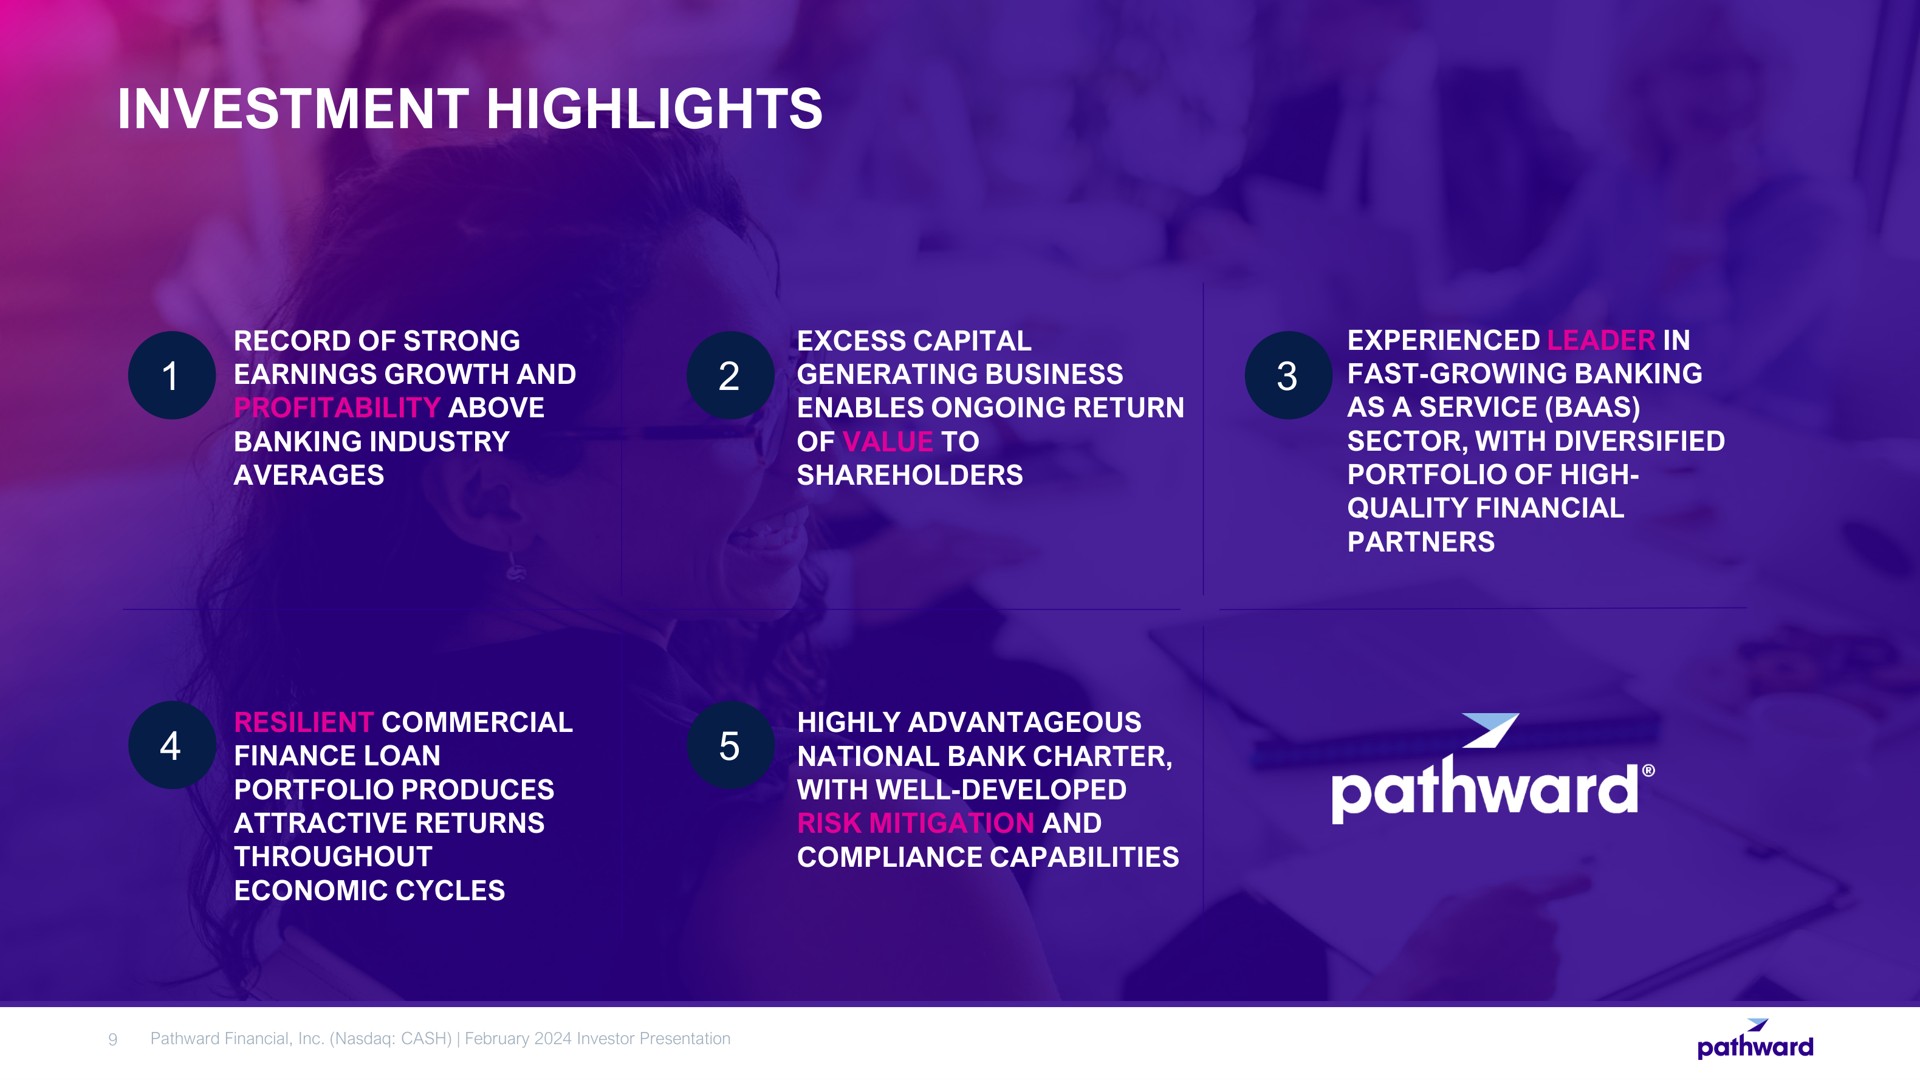 investment highlights | Pathward Financial